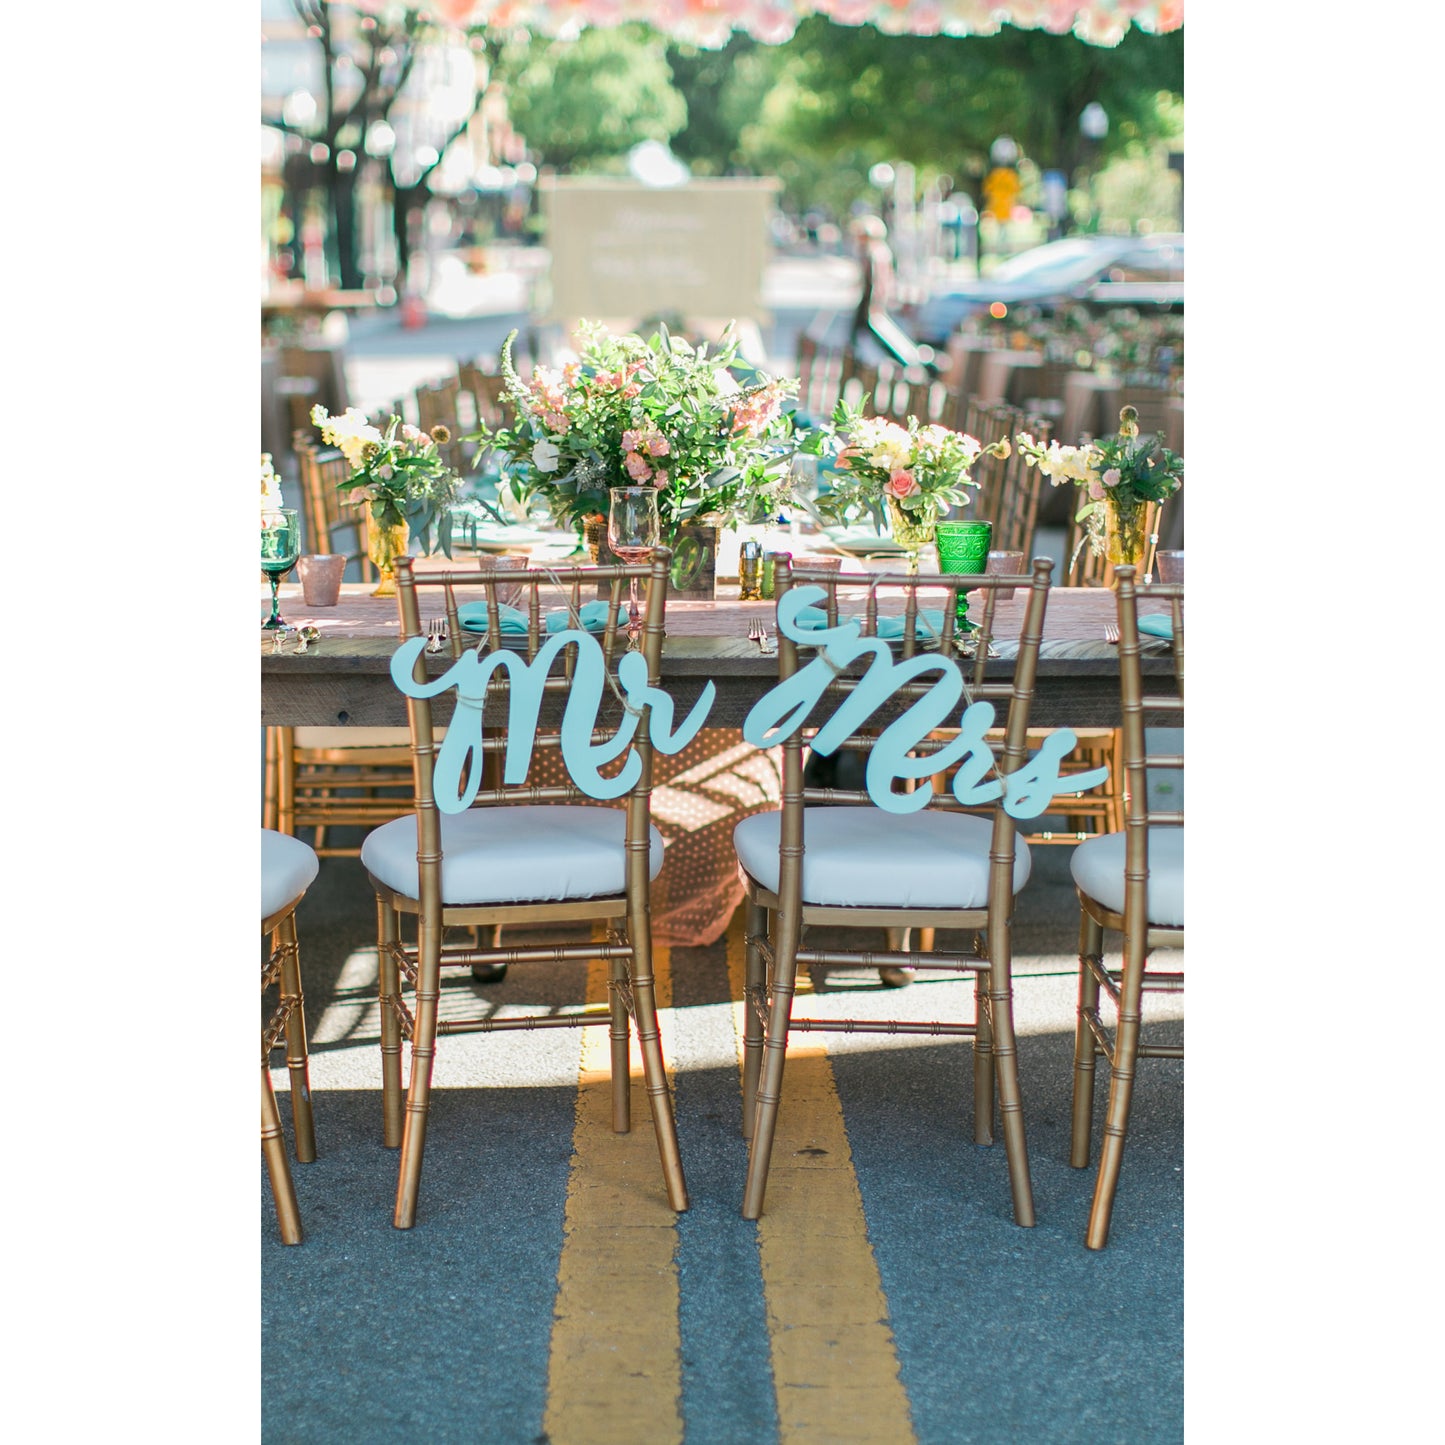 Mr & Mrs Chair Signs Calligraphy Style - Wedding Decor Gifts